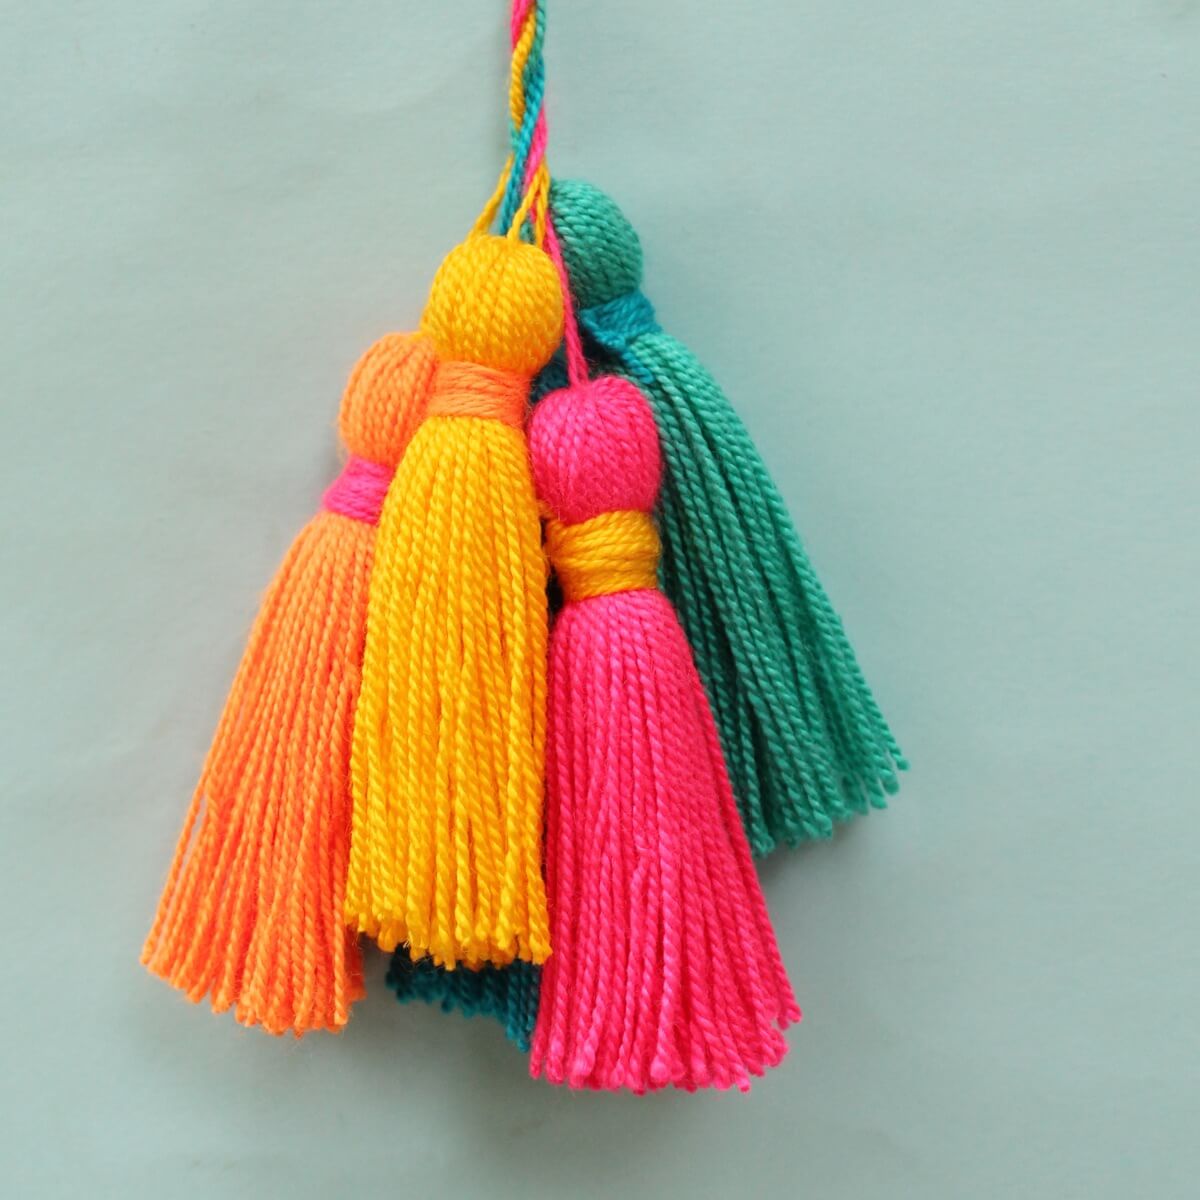 Colurful Yarn Tassel Project For Toddlers : Yarn Projects For Beginners